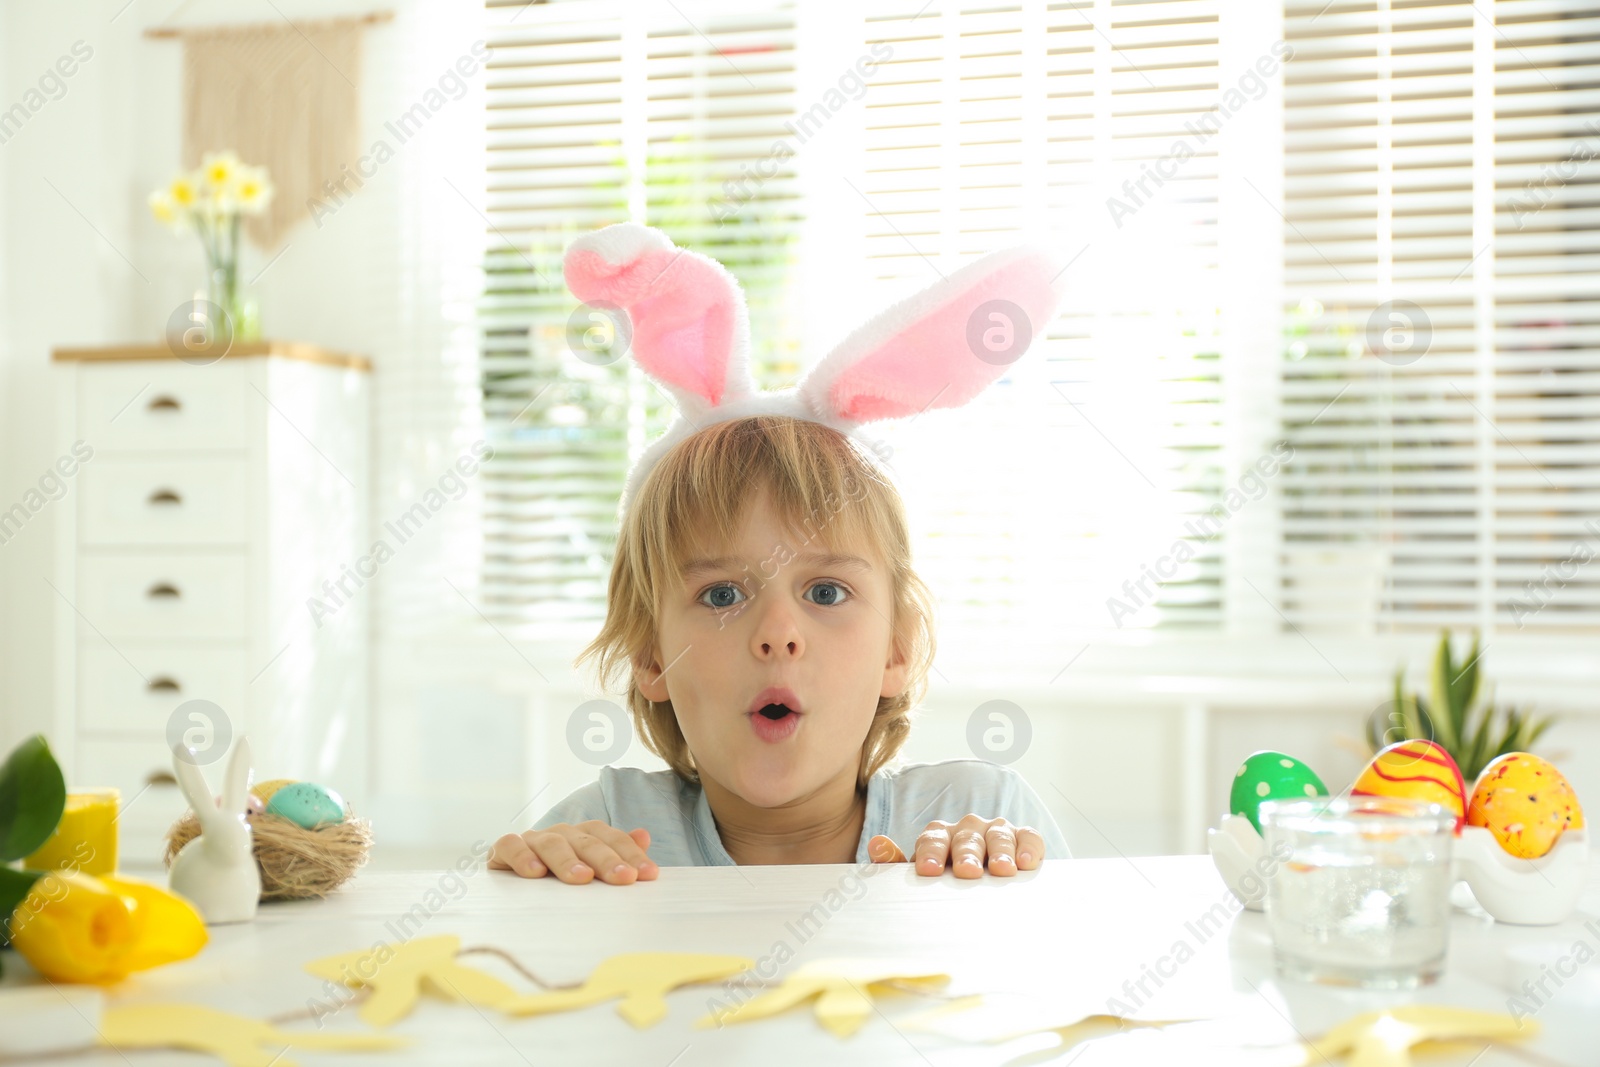 Photo of Emotional little boy wearing bunny ears headband at table with Easter eggs, indoors